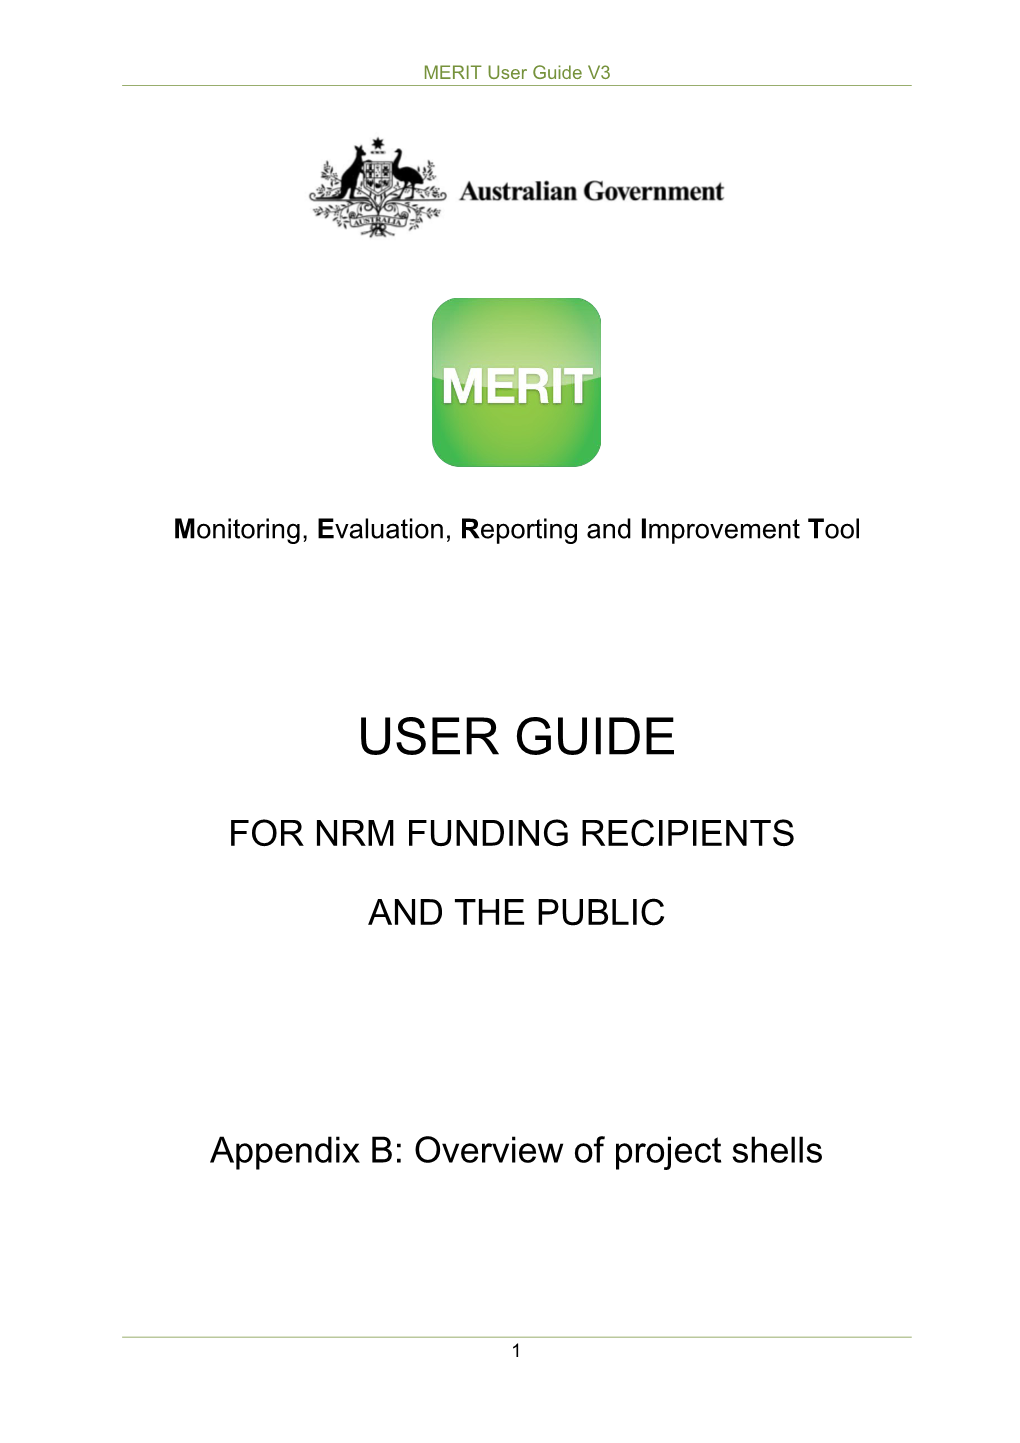 MERIT User Guide Appendix B Overview of Project Shells